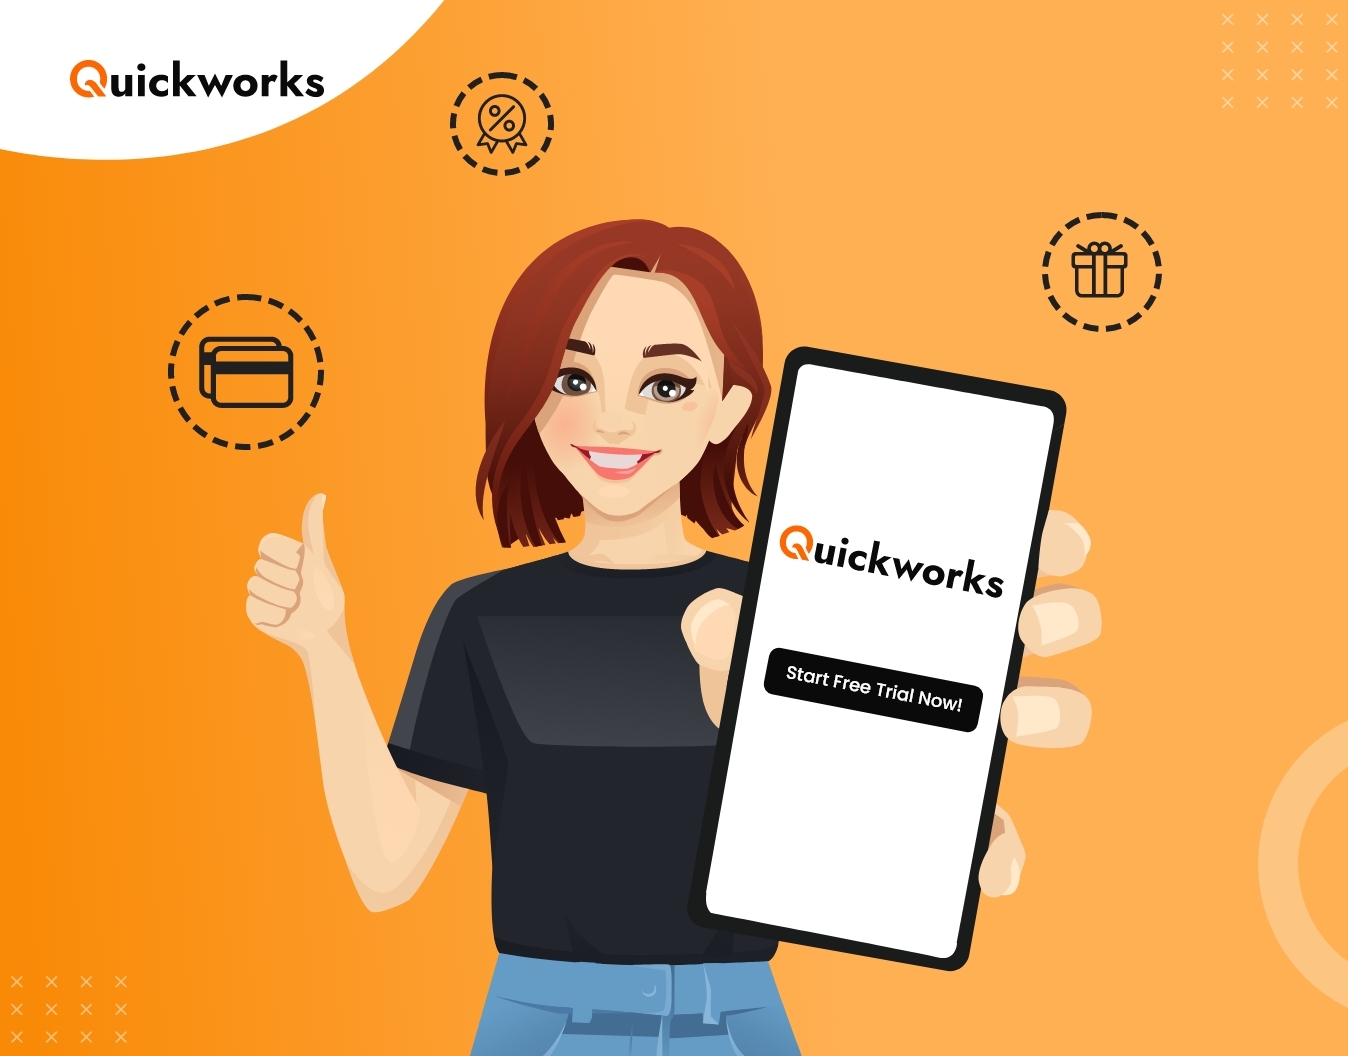 How to Start Your Quickworks’ 7 Days Free Trial Pack Journey?